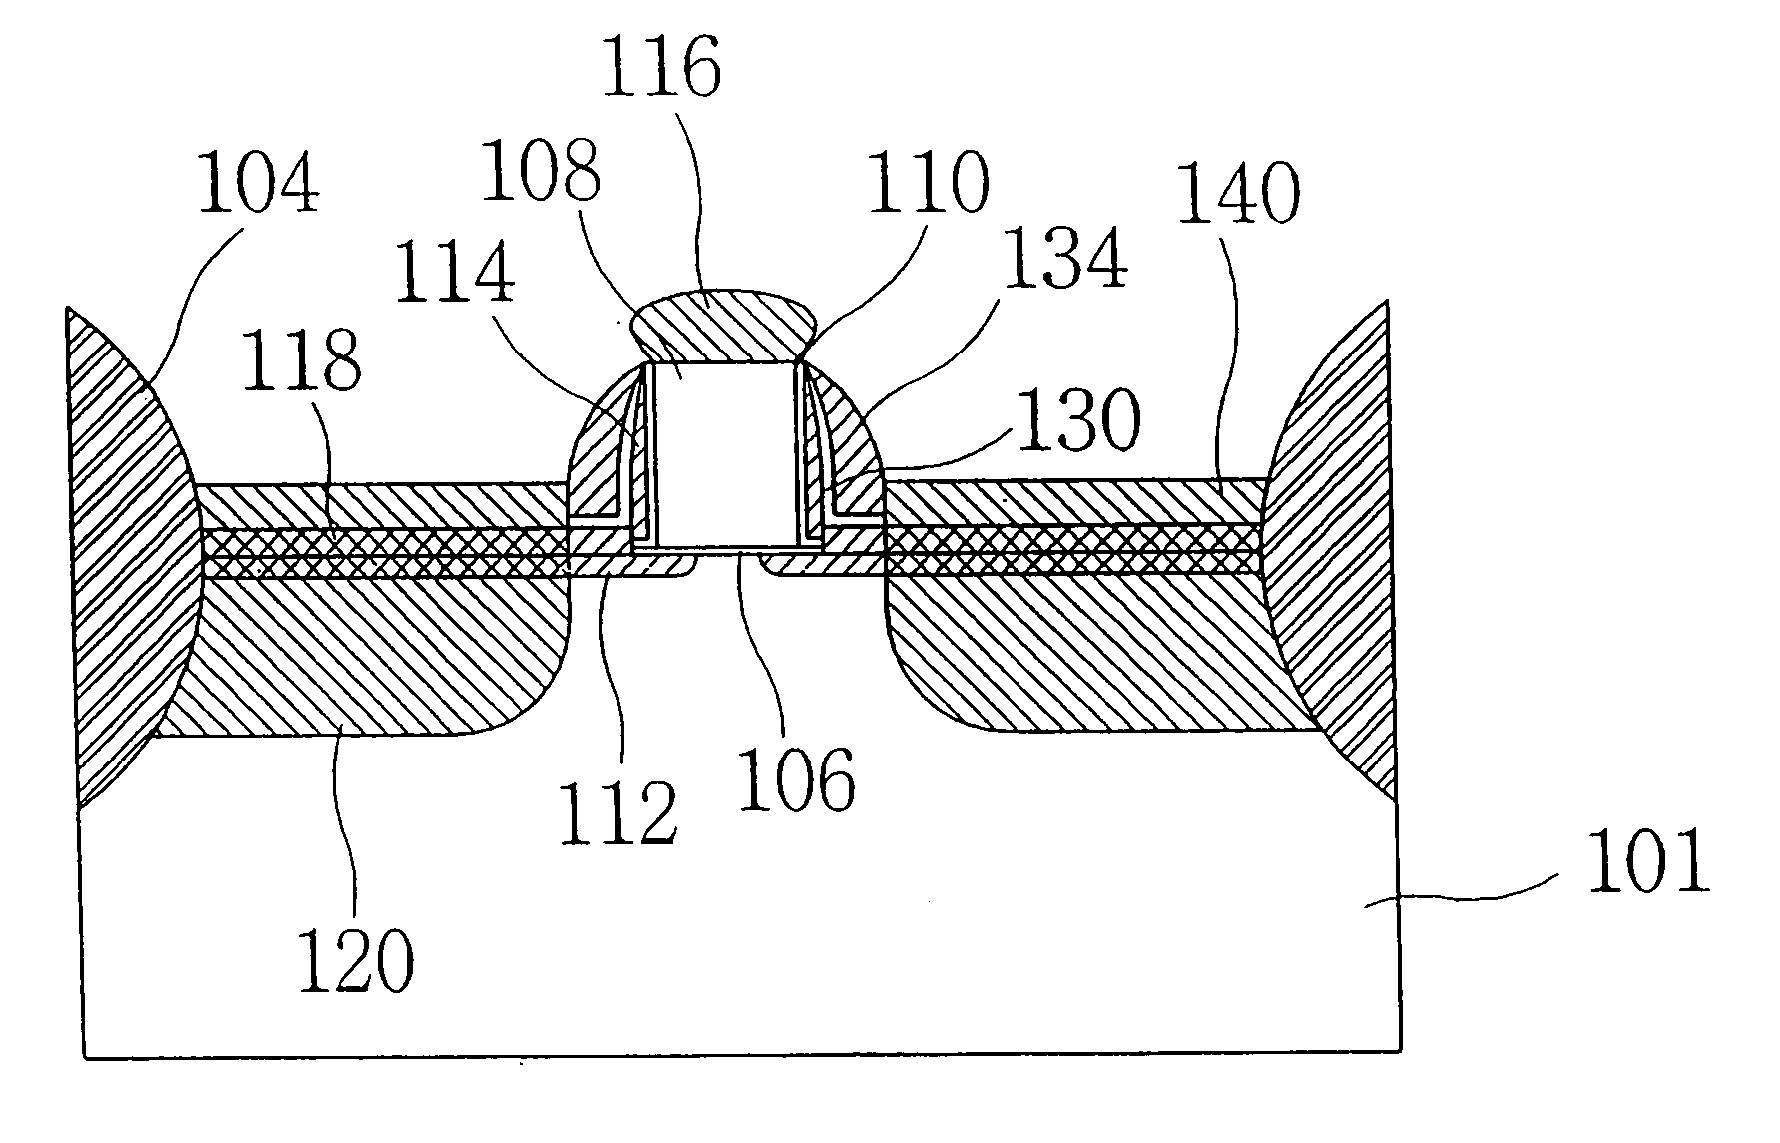 MOS transistor with elevated source/drain structure